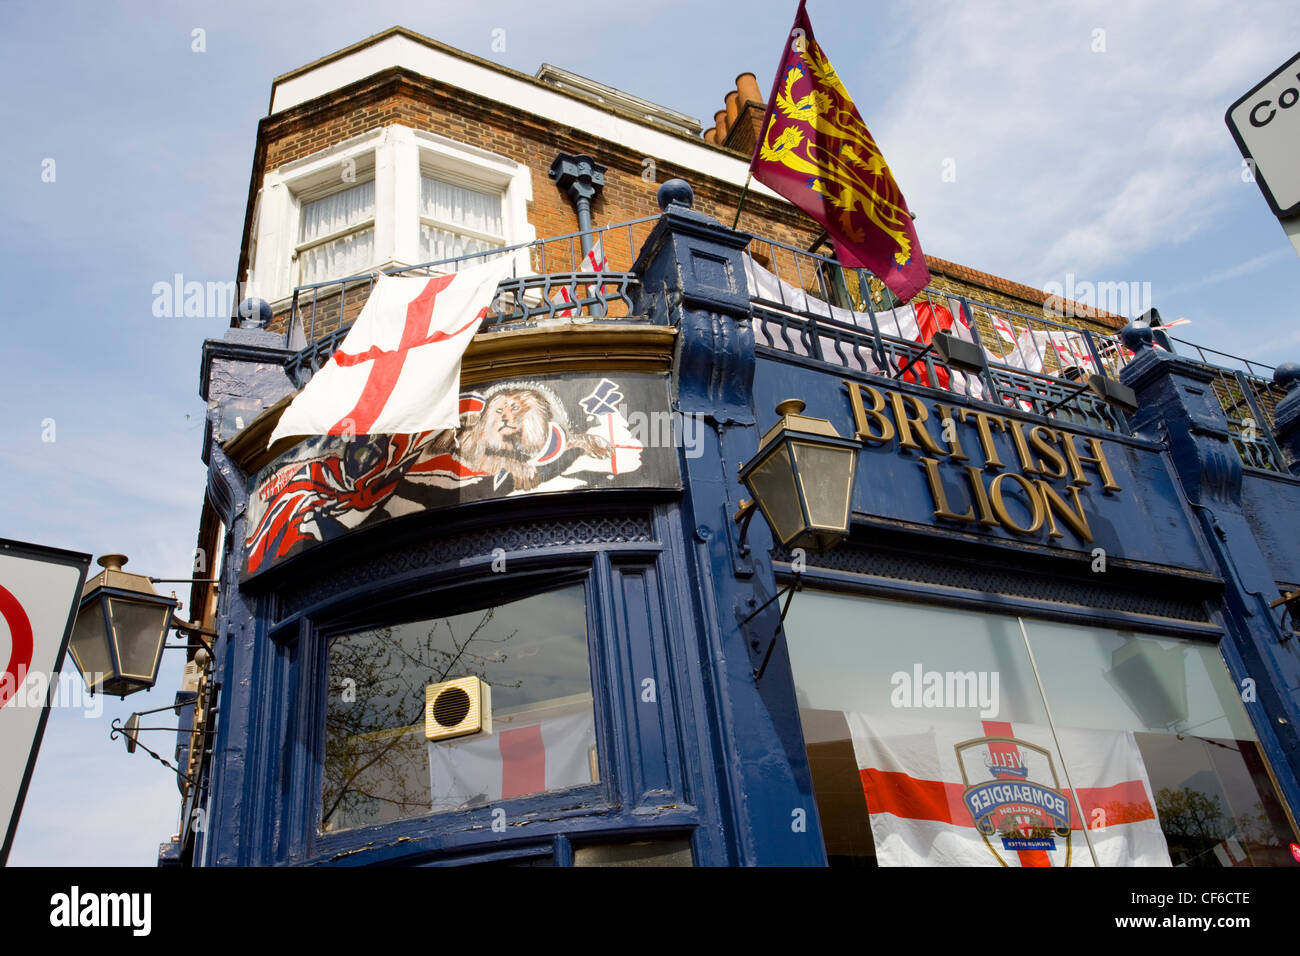 St George flags flying outside the British Lion pub on Hackney Road Stock Photo